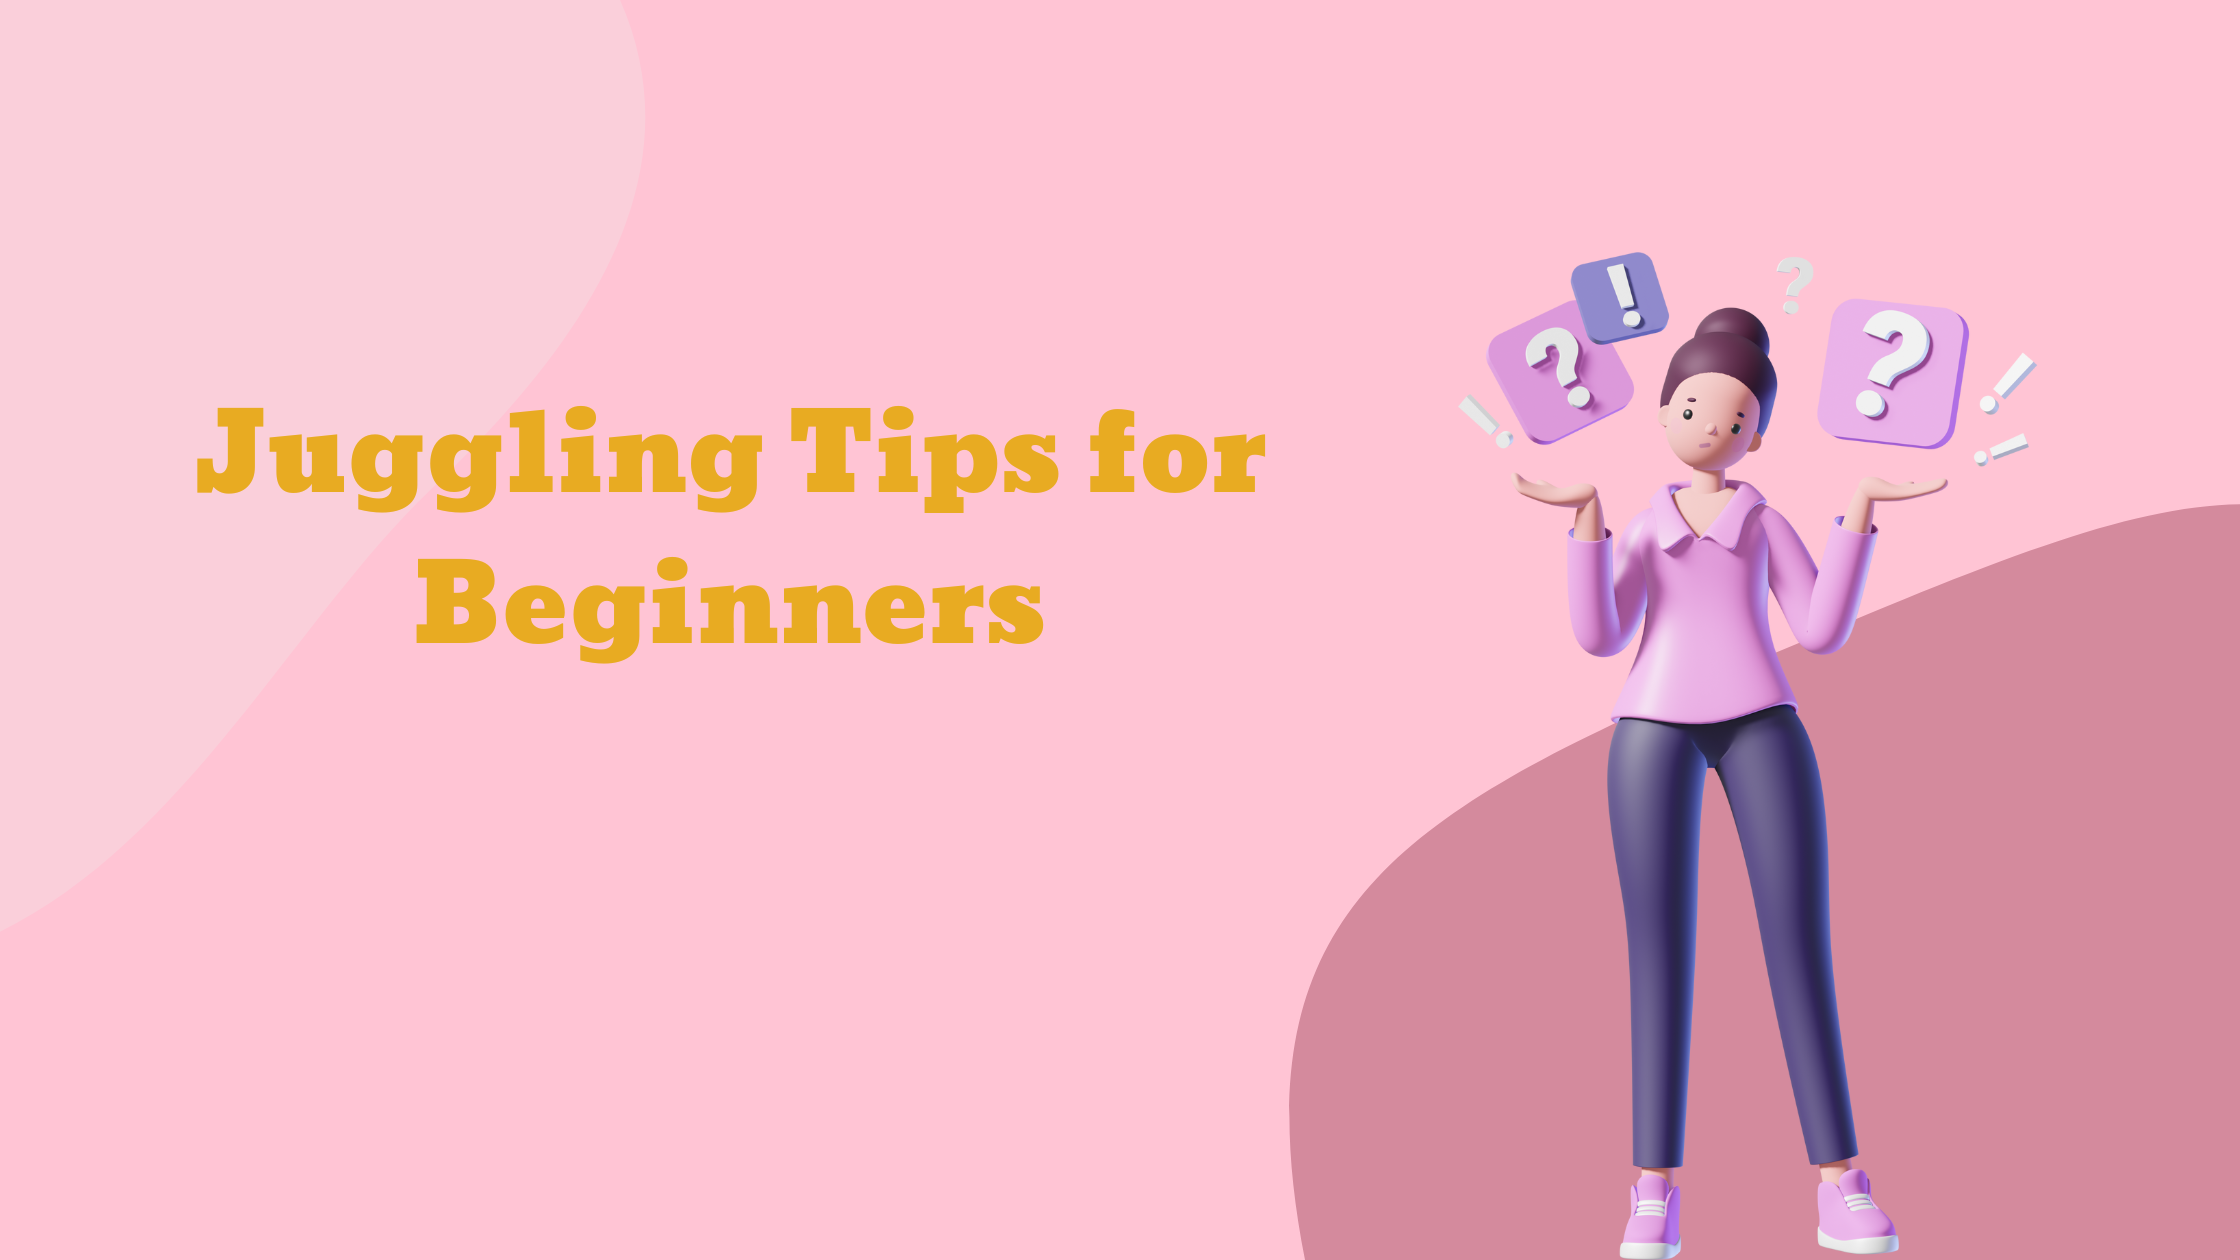 Juggling Tips for Beginners